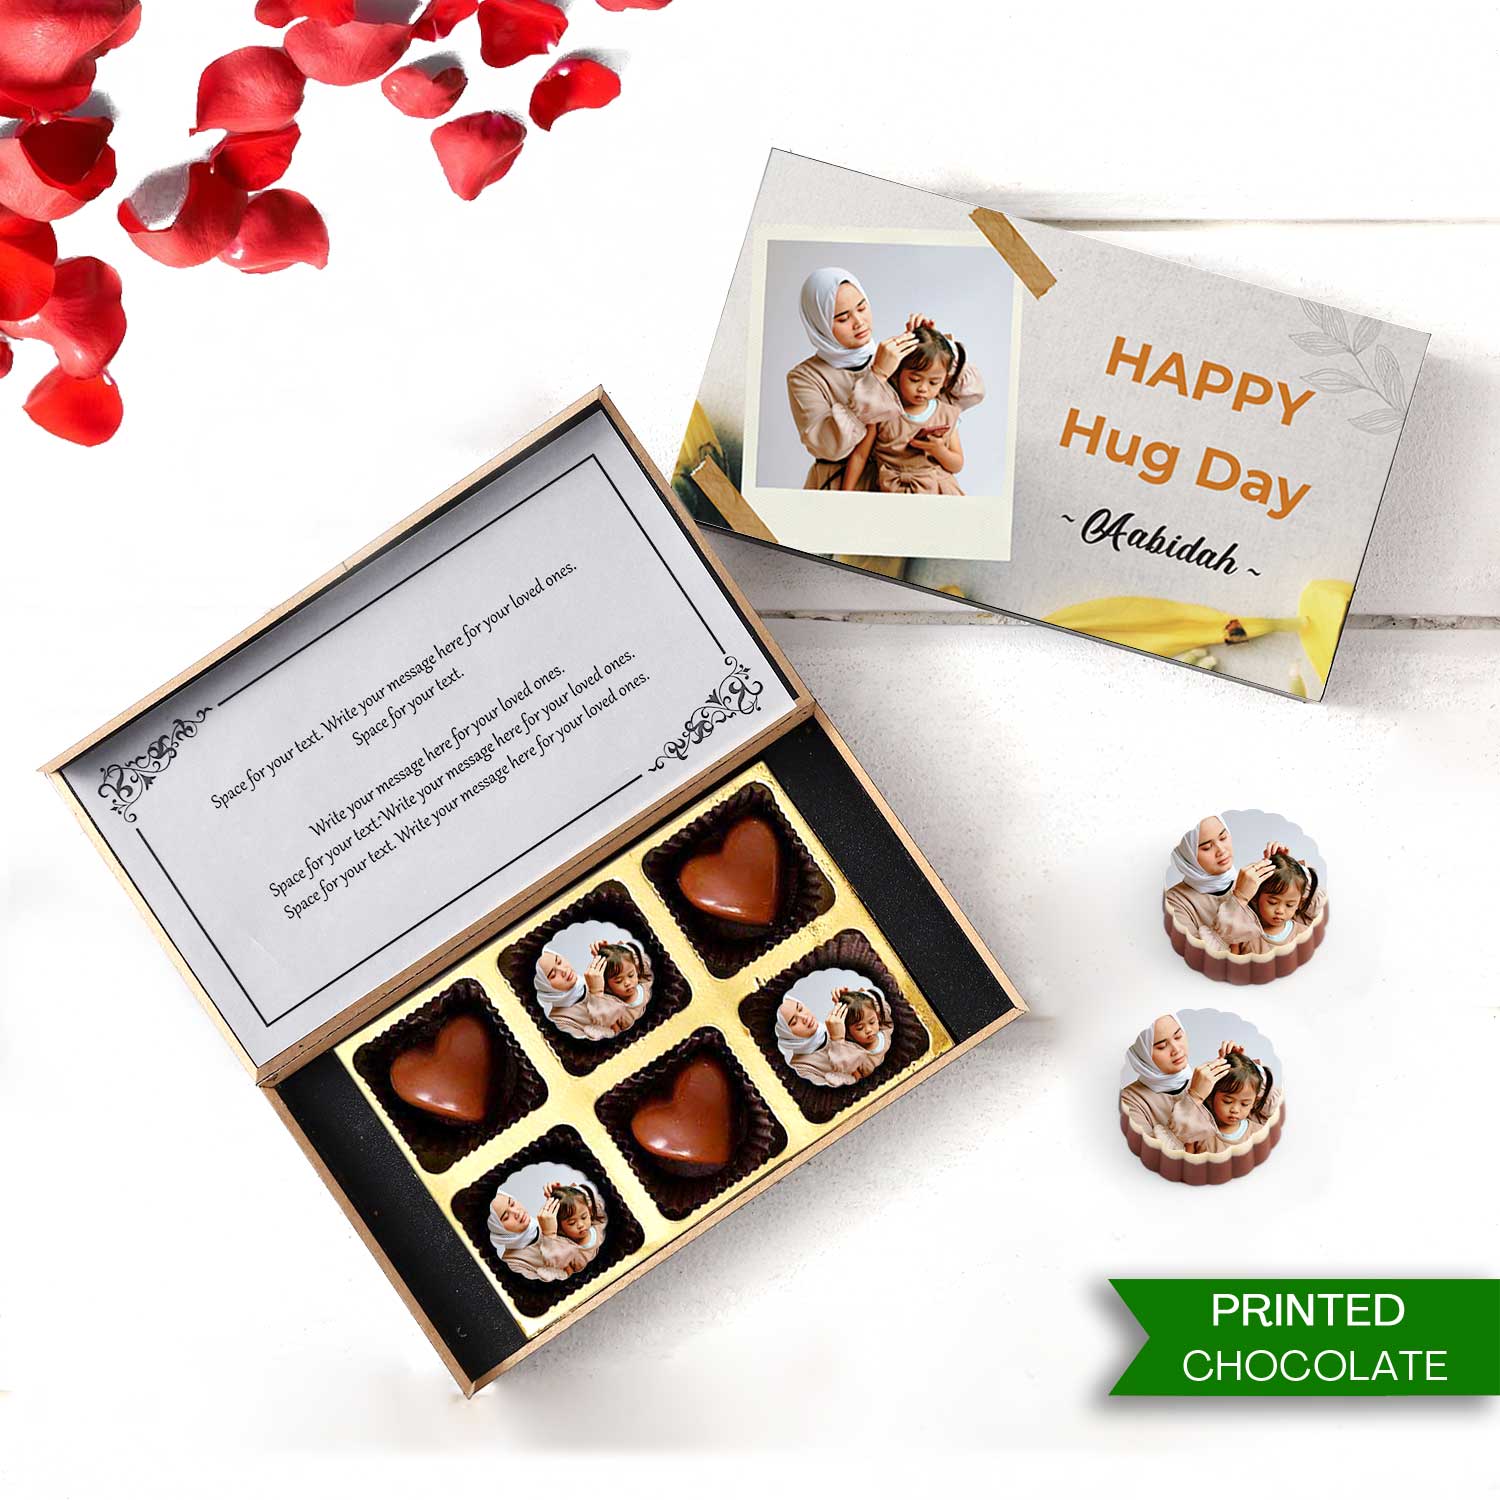 Happy Chocolate Day Quotes, Wishes & Images For Love | FNP